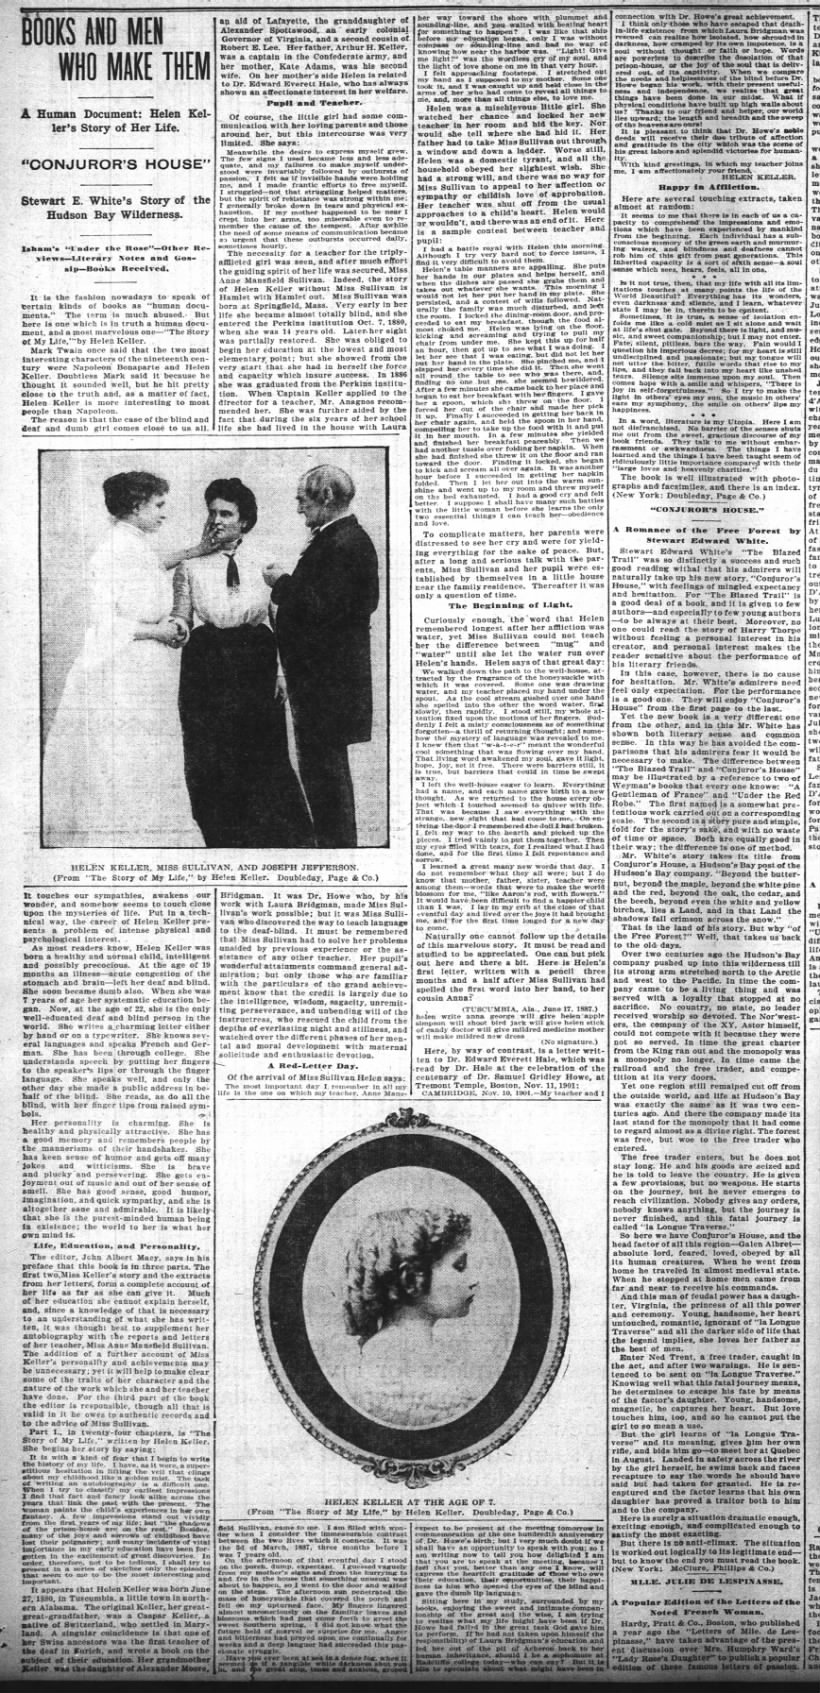 Helen Keller's "The Story of My Life" is published in 1903; article includes book quotes and photos